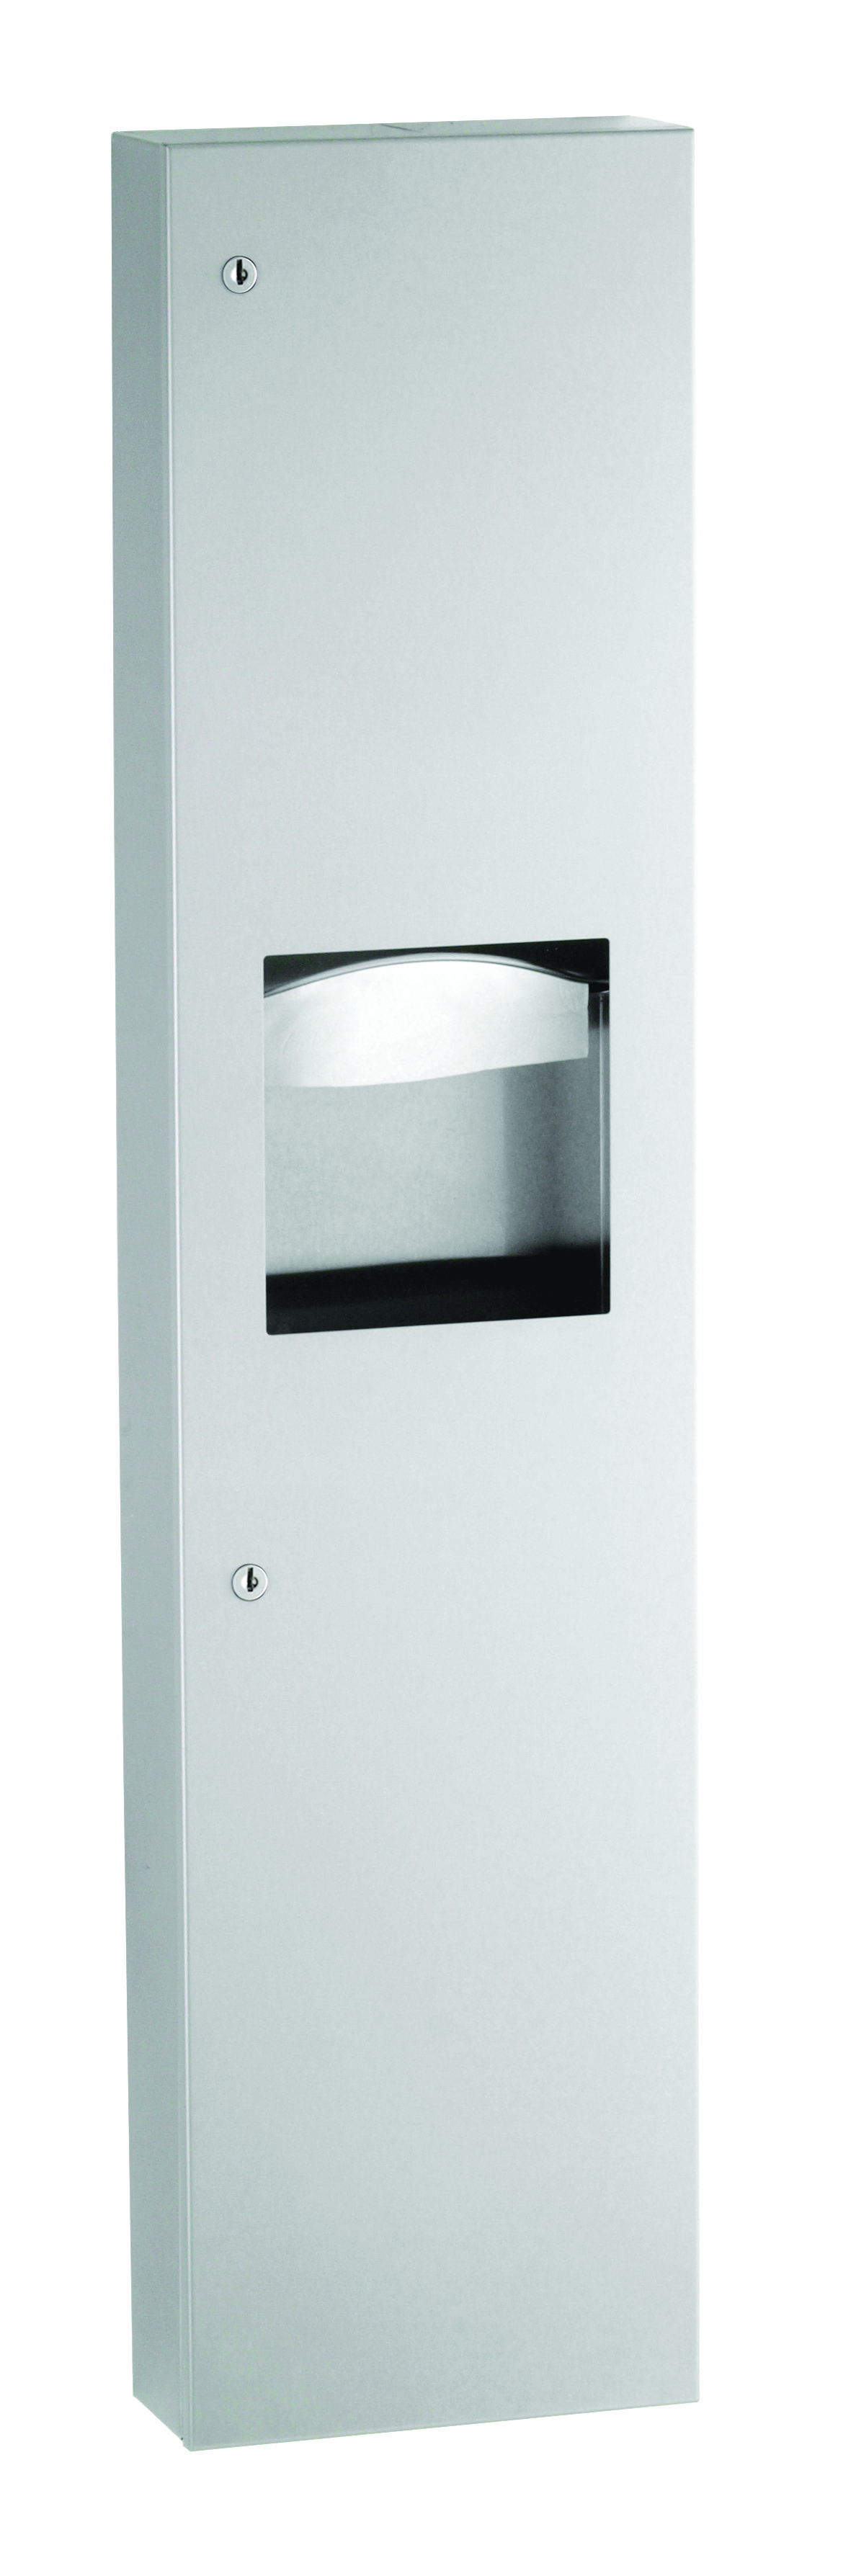 Surface-Mounted Paper Towel Dispenser/Waste Receptacle Image